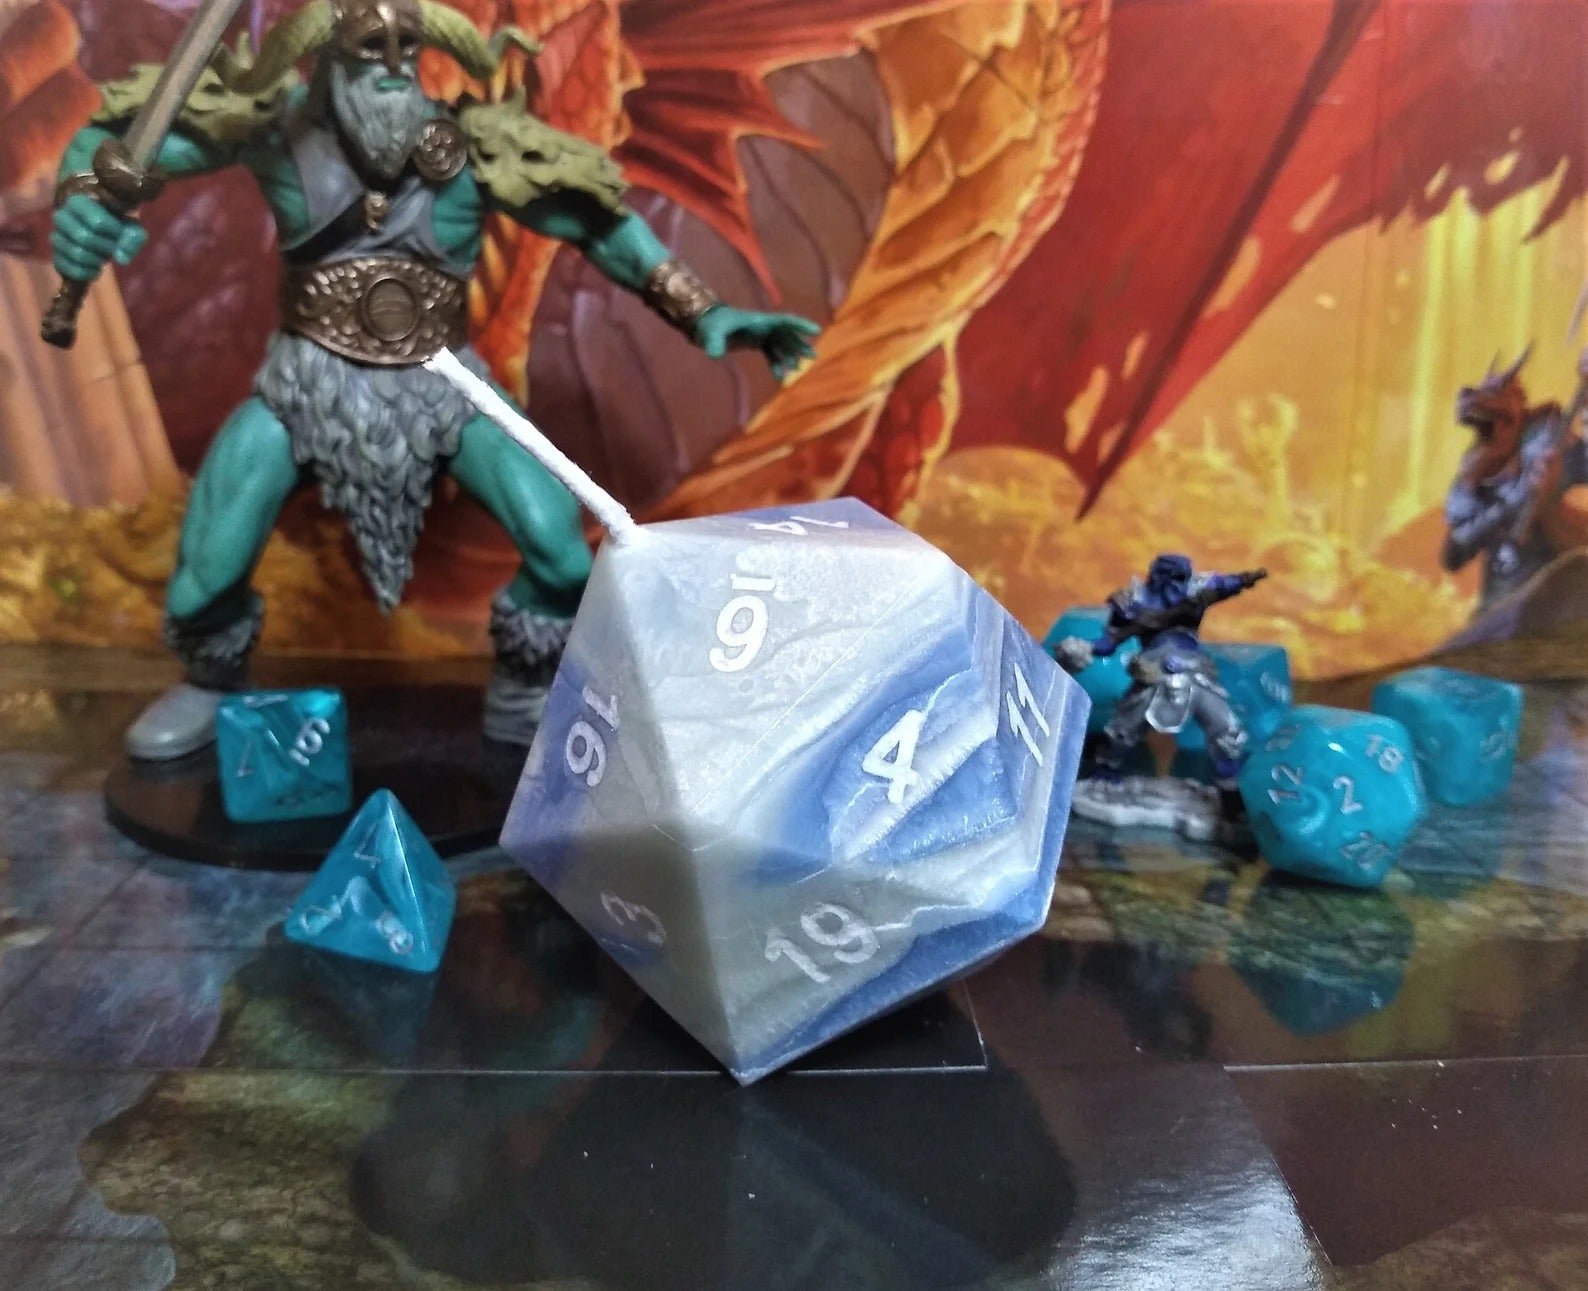 the d20 candle amongst real, small dice